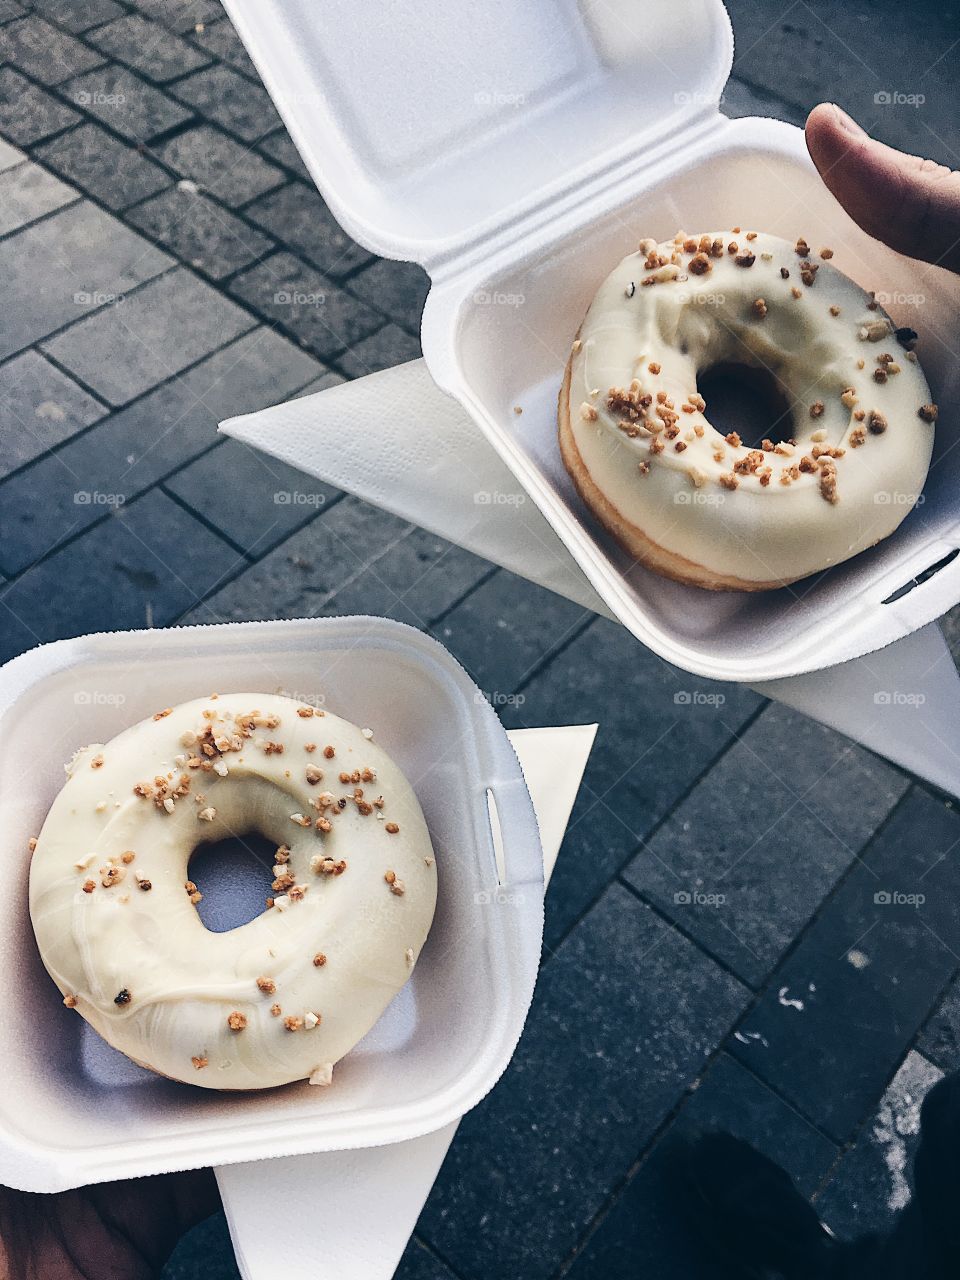 Donuts from Belgium